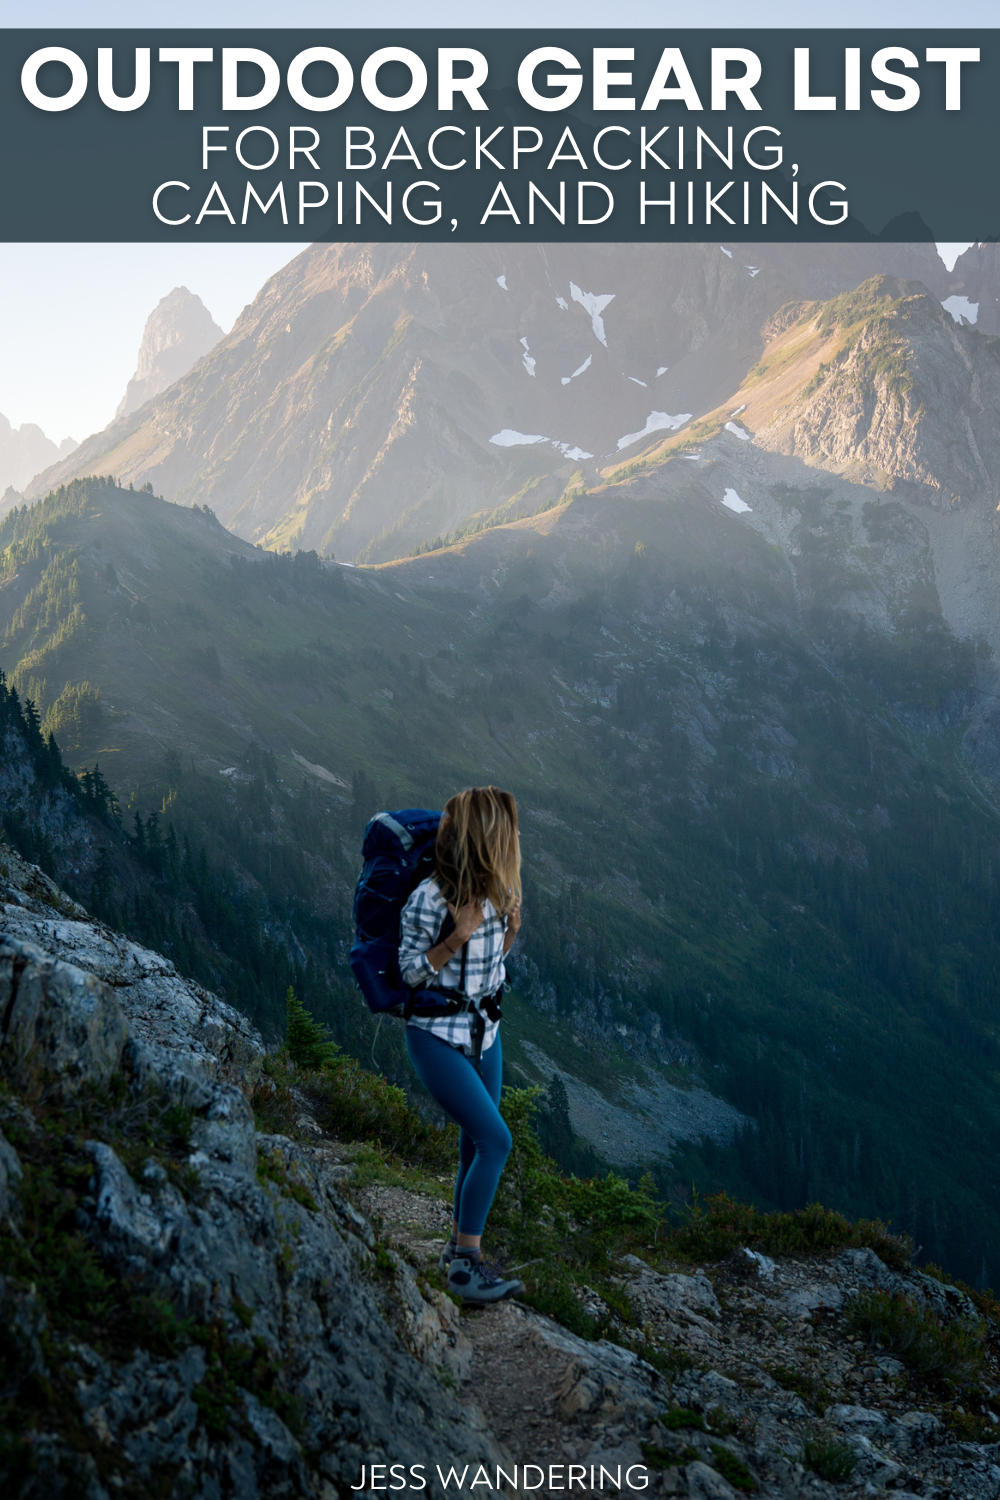 outdoor gear list for backpacking, camping and hiking pin with image of Jess Wandering on a hiking trail in front of mountains